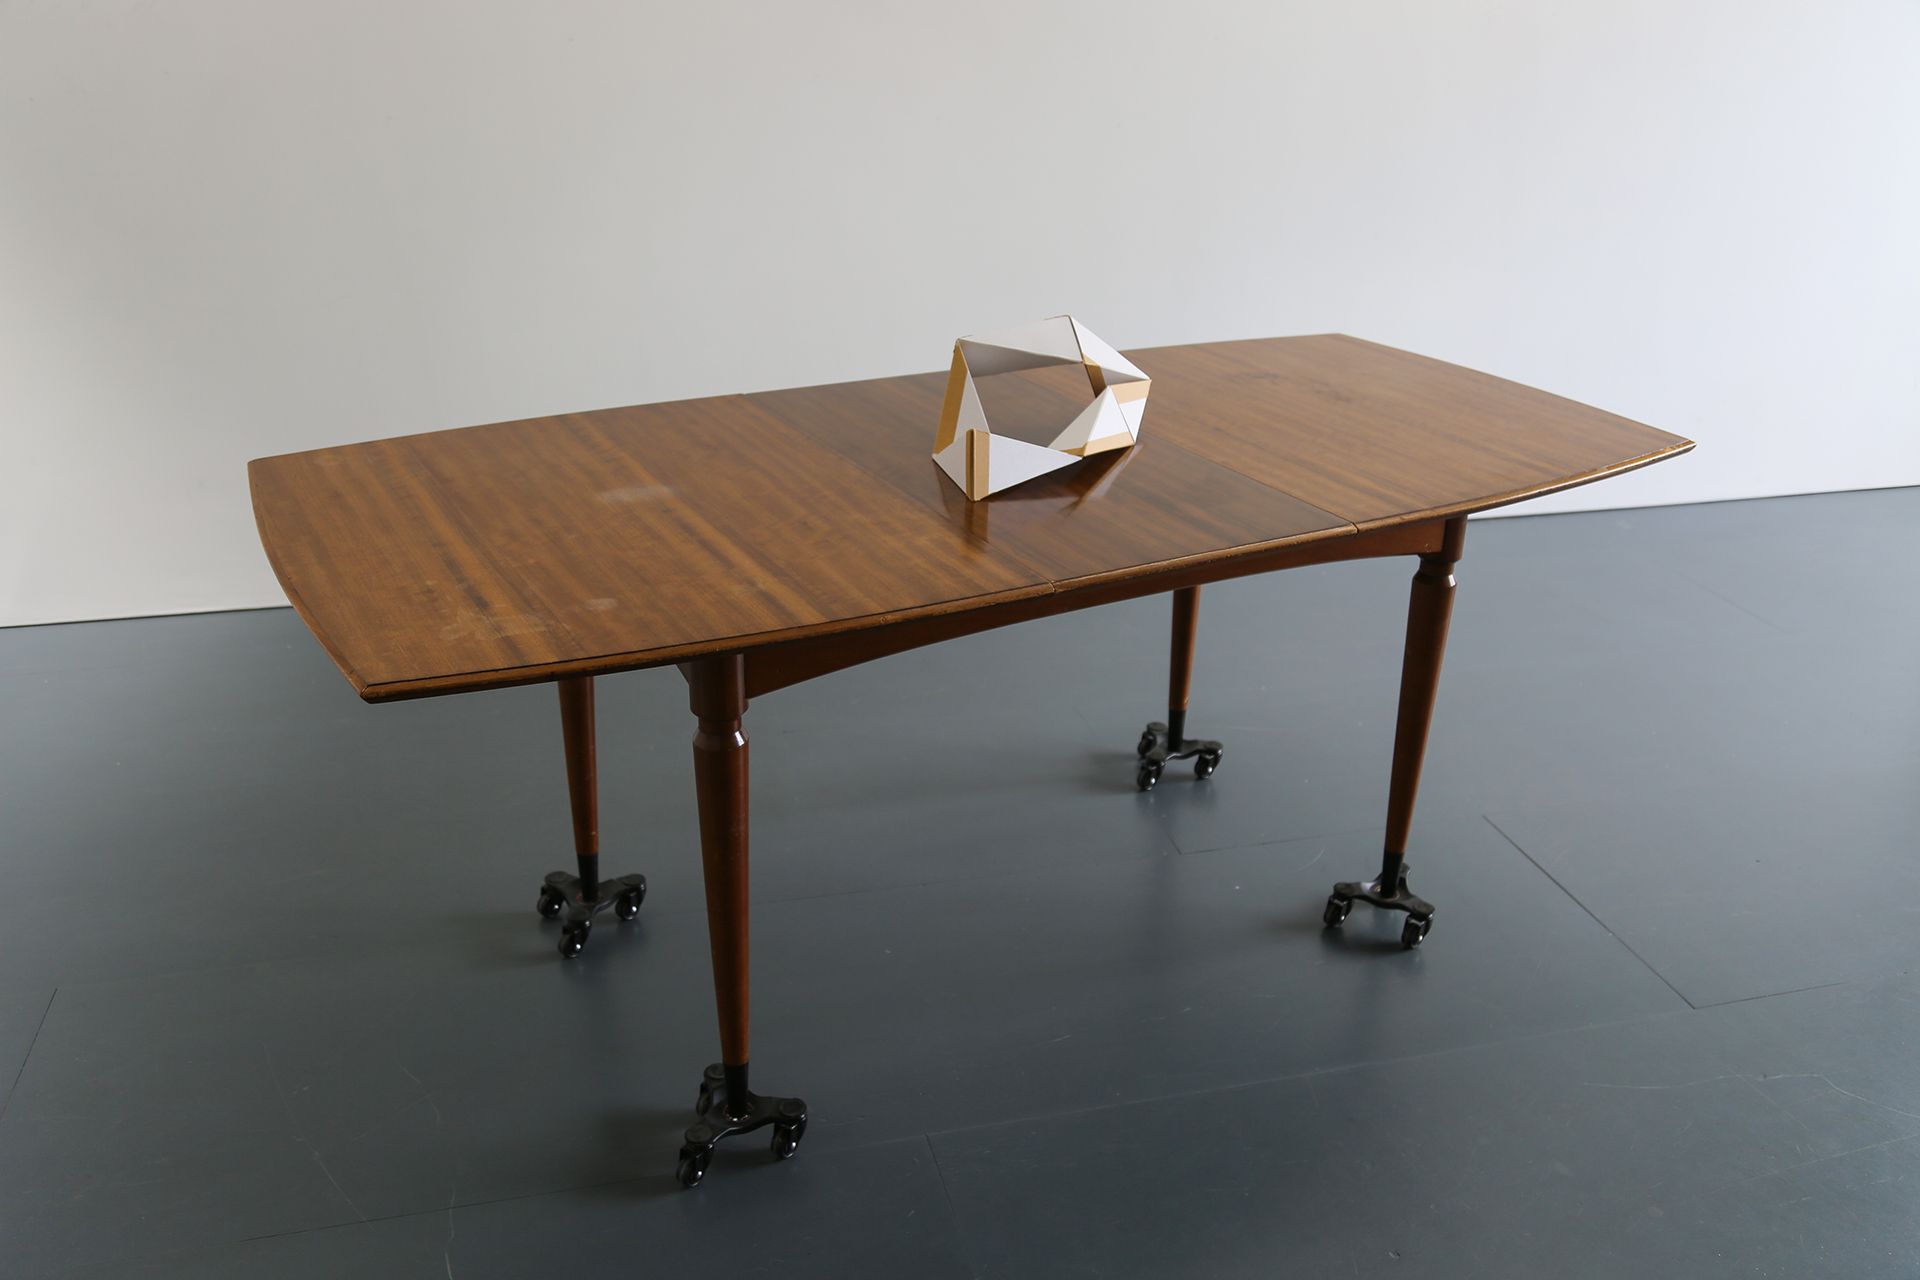 Lucy Gunning, Inheritance on Wheels, 2023. Mid 50s family table, wheels. With Props: Seven link moveable chain, 2023.